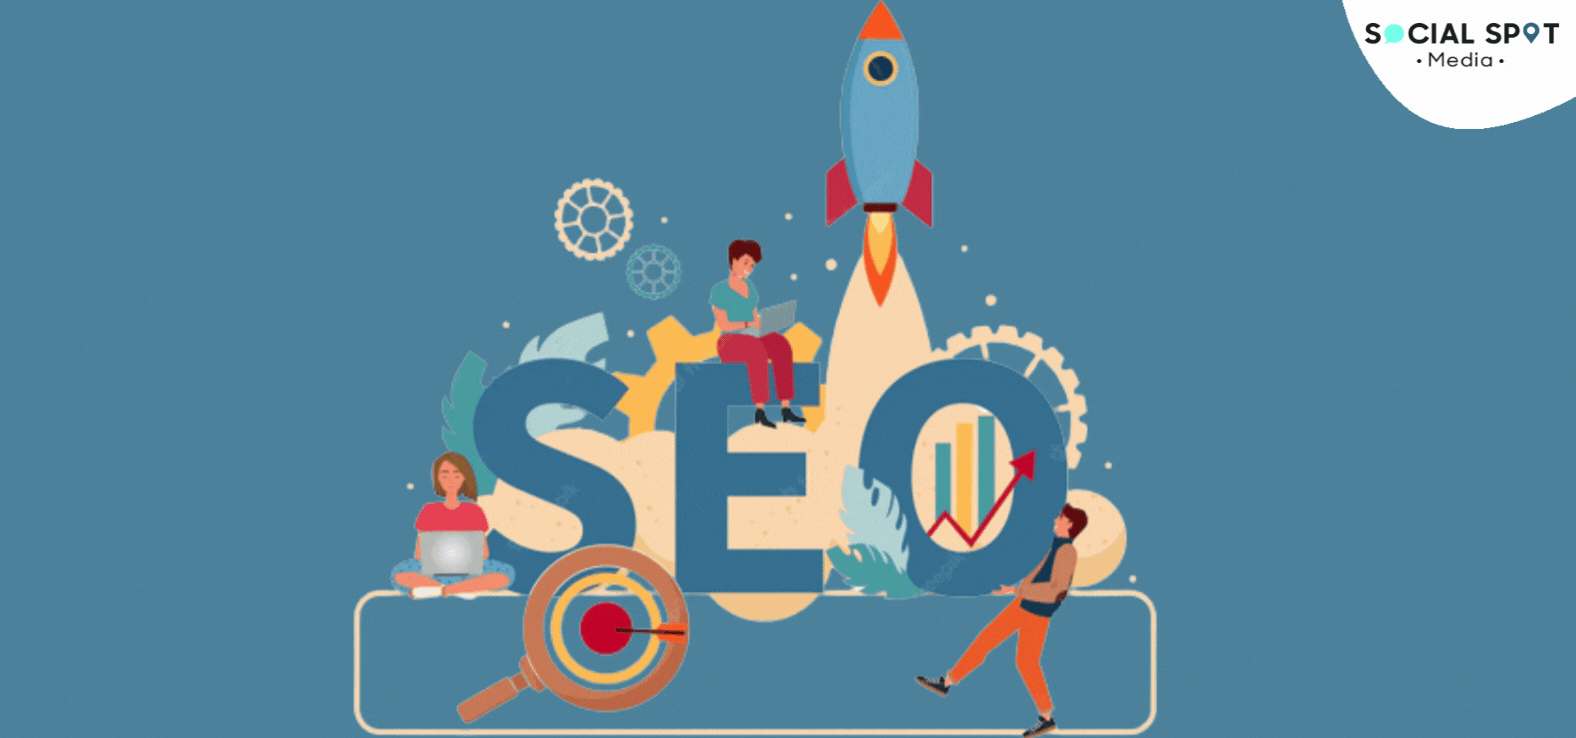 Boost your traffic with these SEO tips!